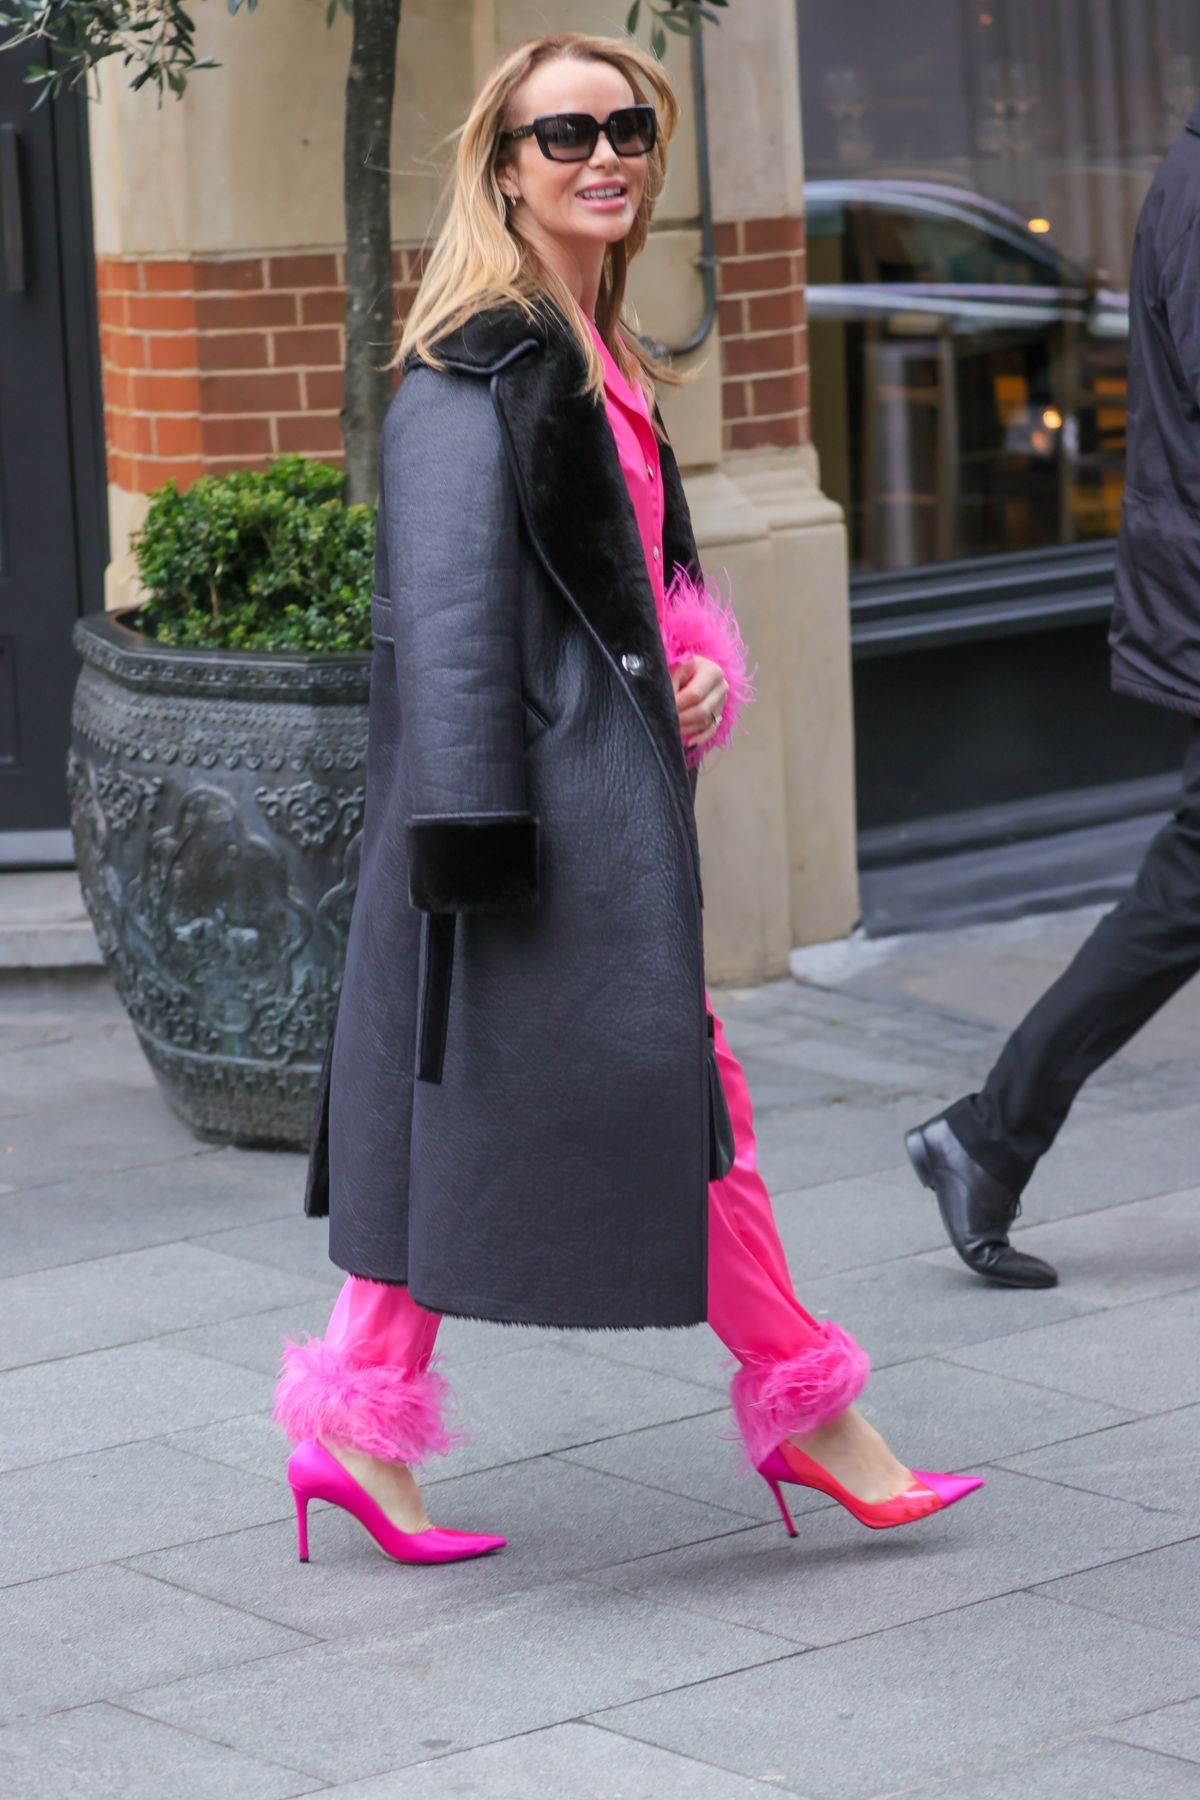 Amanda Holden arrives in Pink Outfit at Heart Radio London 3